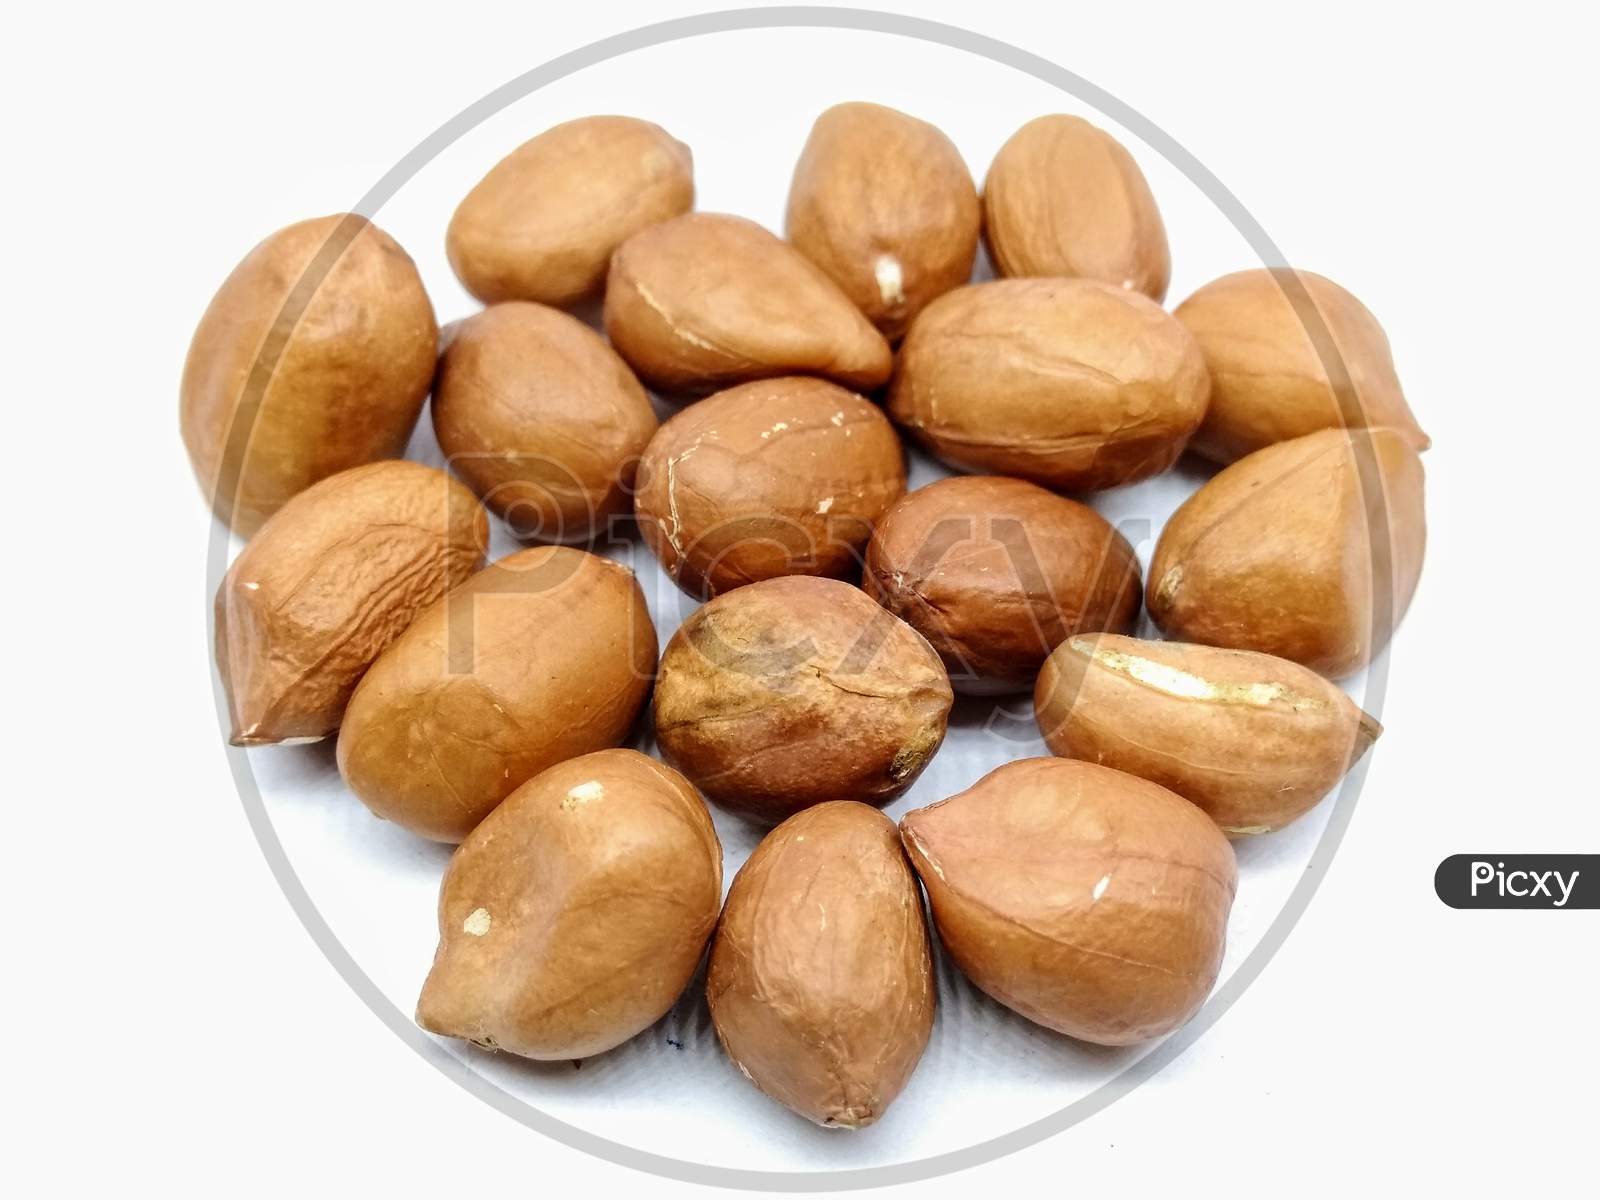 Ground Nuts or Peanuts Closeup On White Background